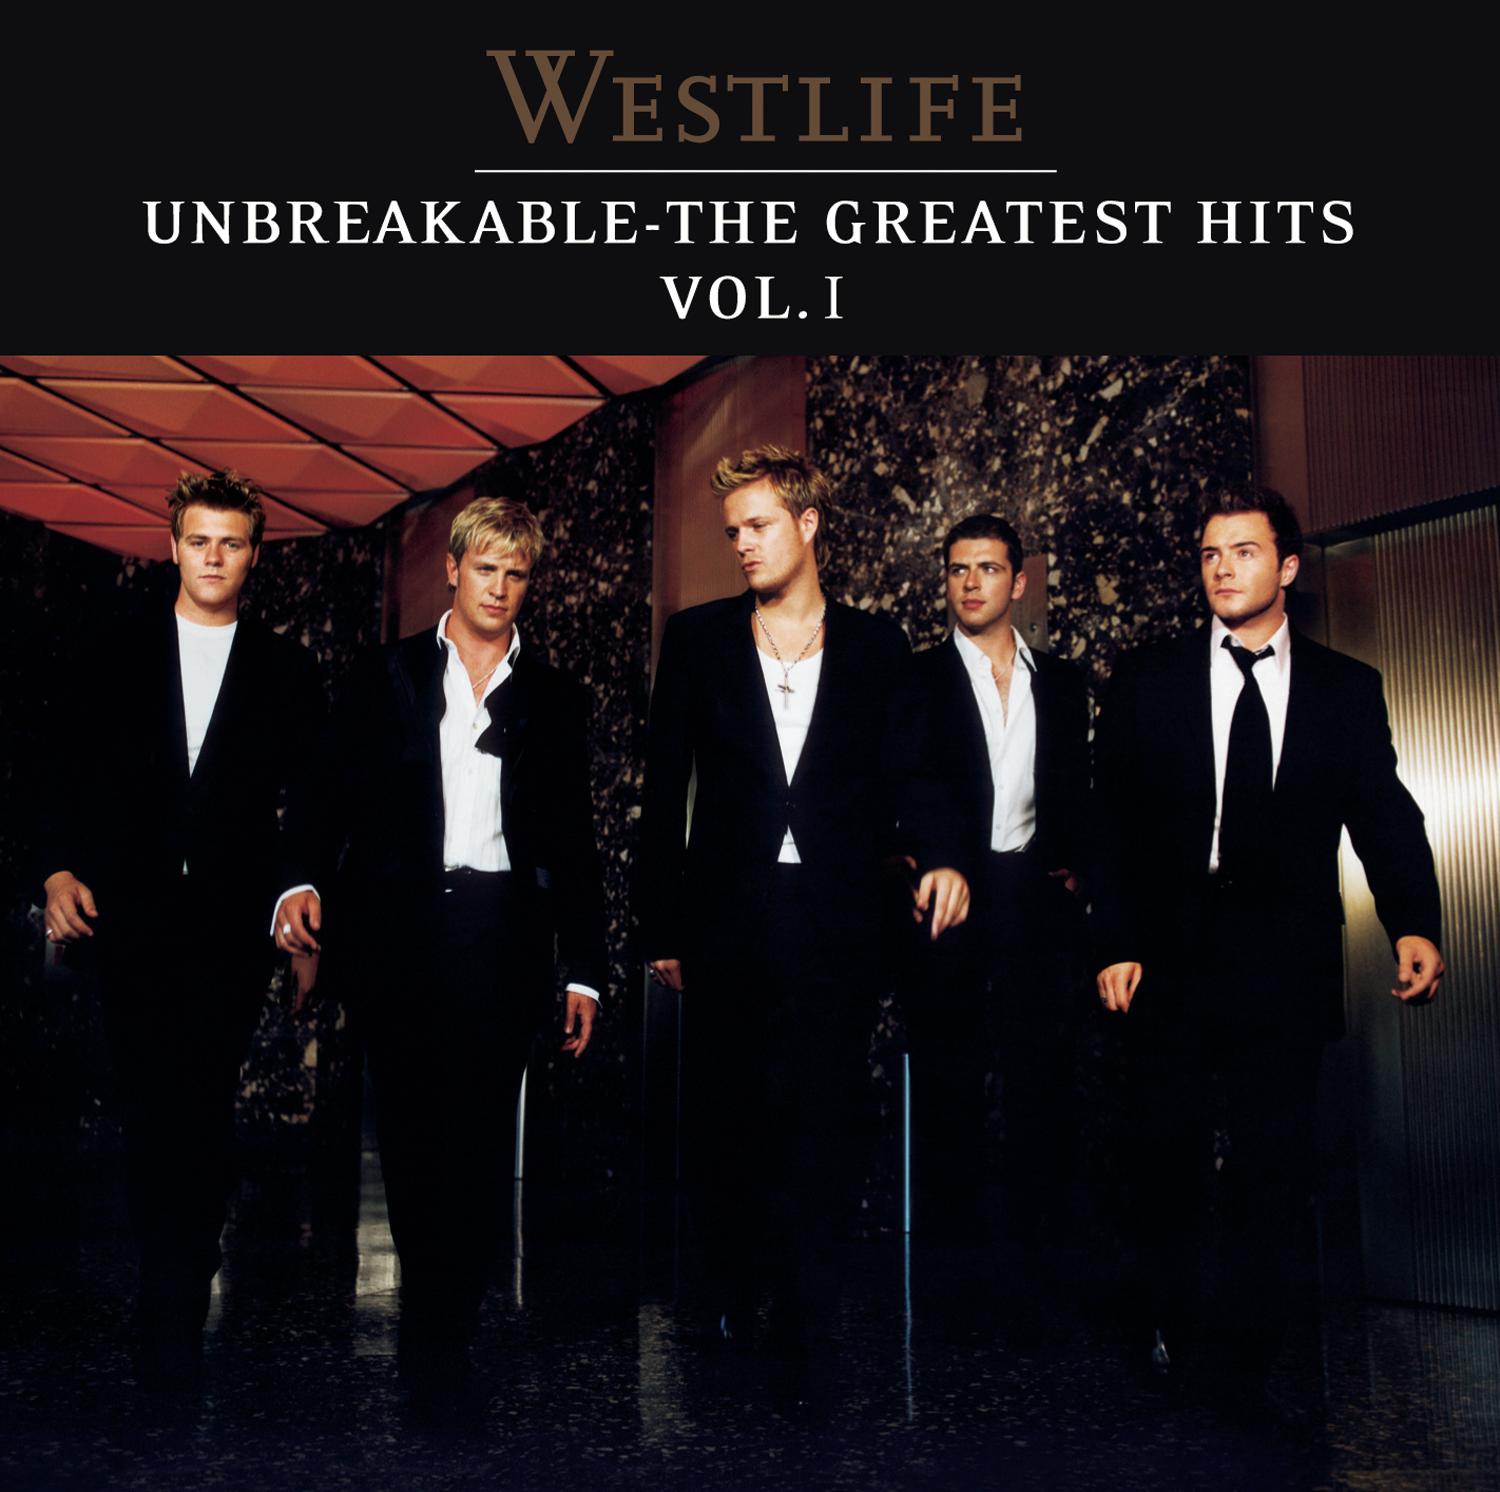 Unbreakable: The Greatest Hits